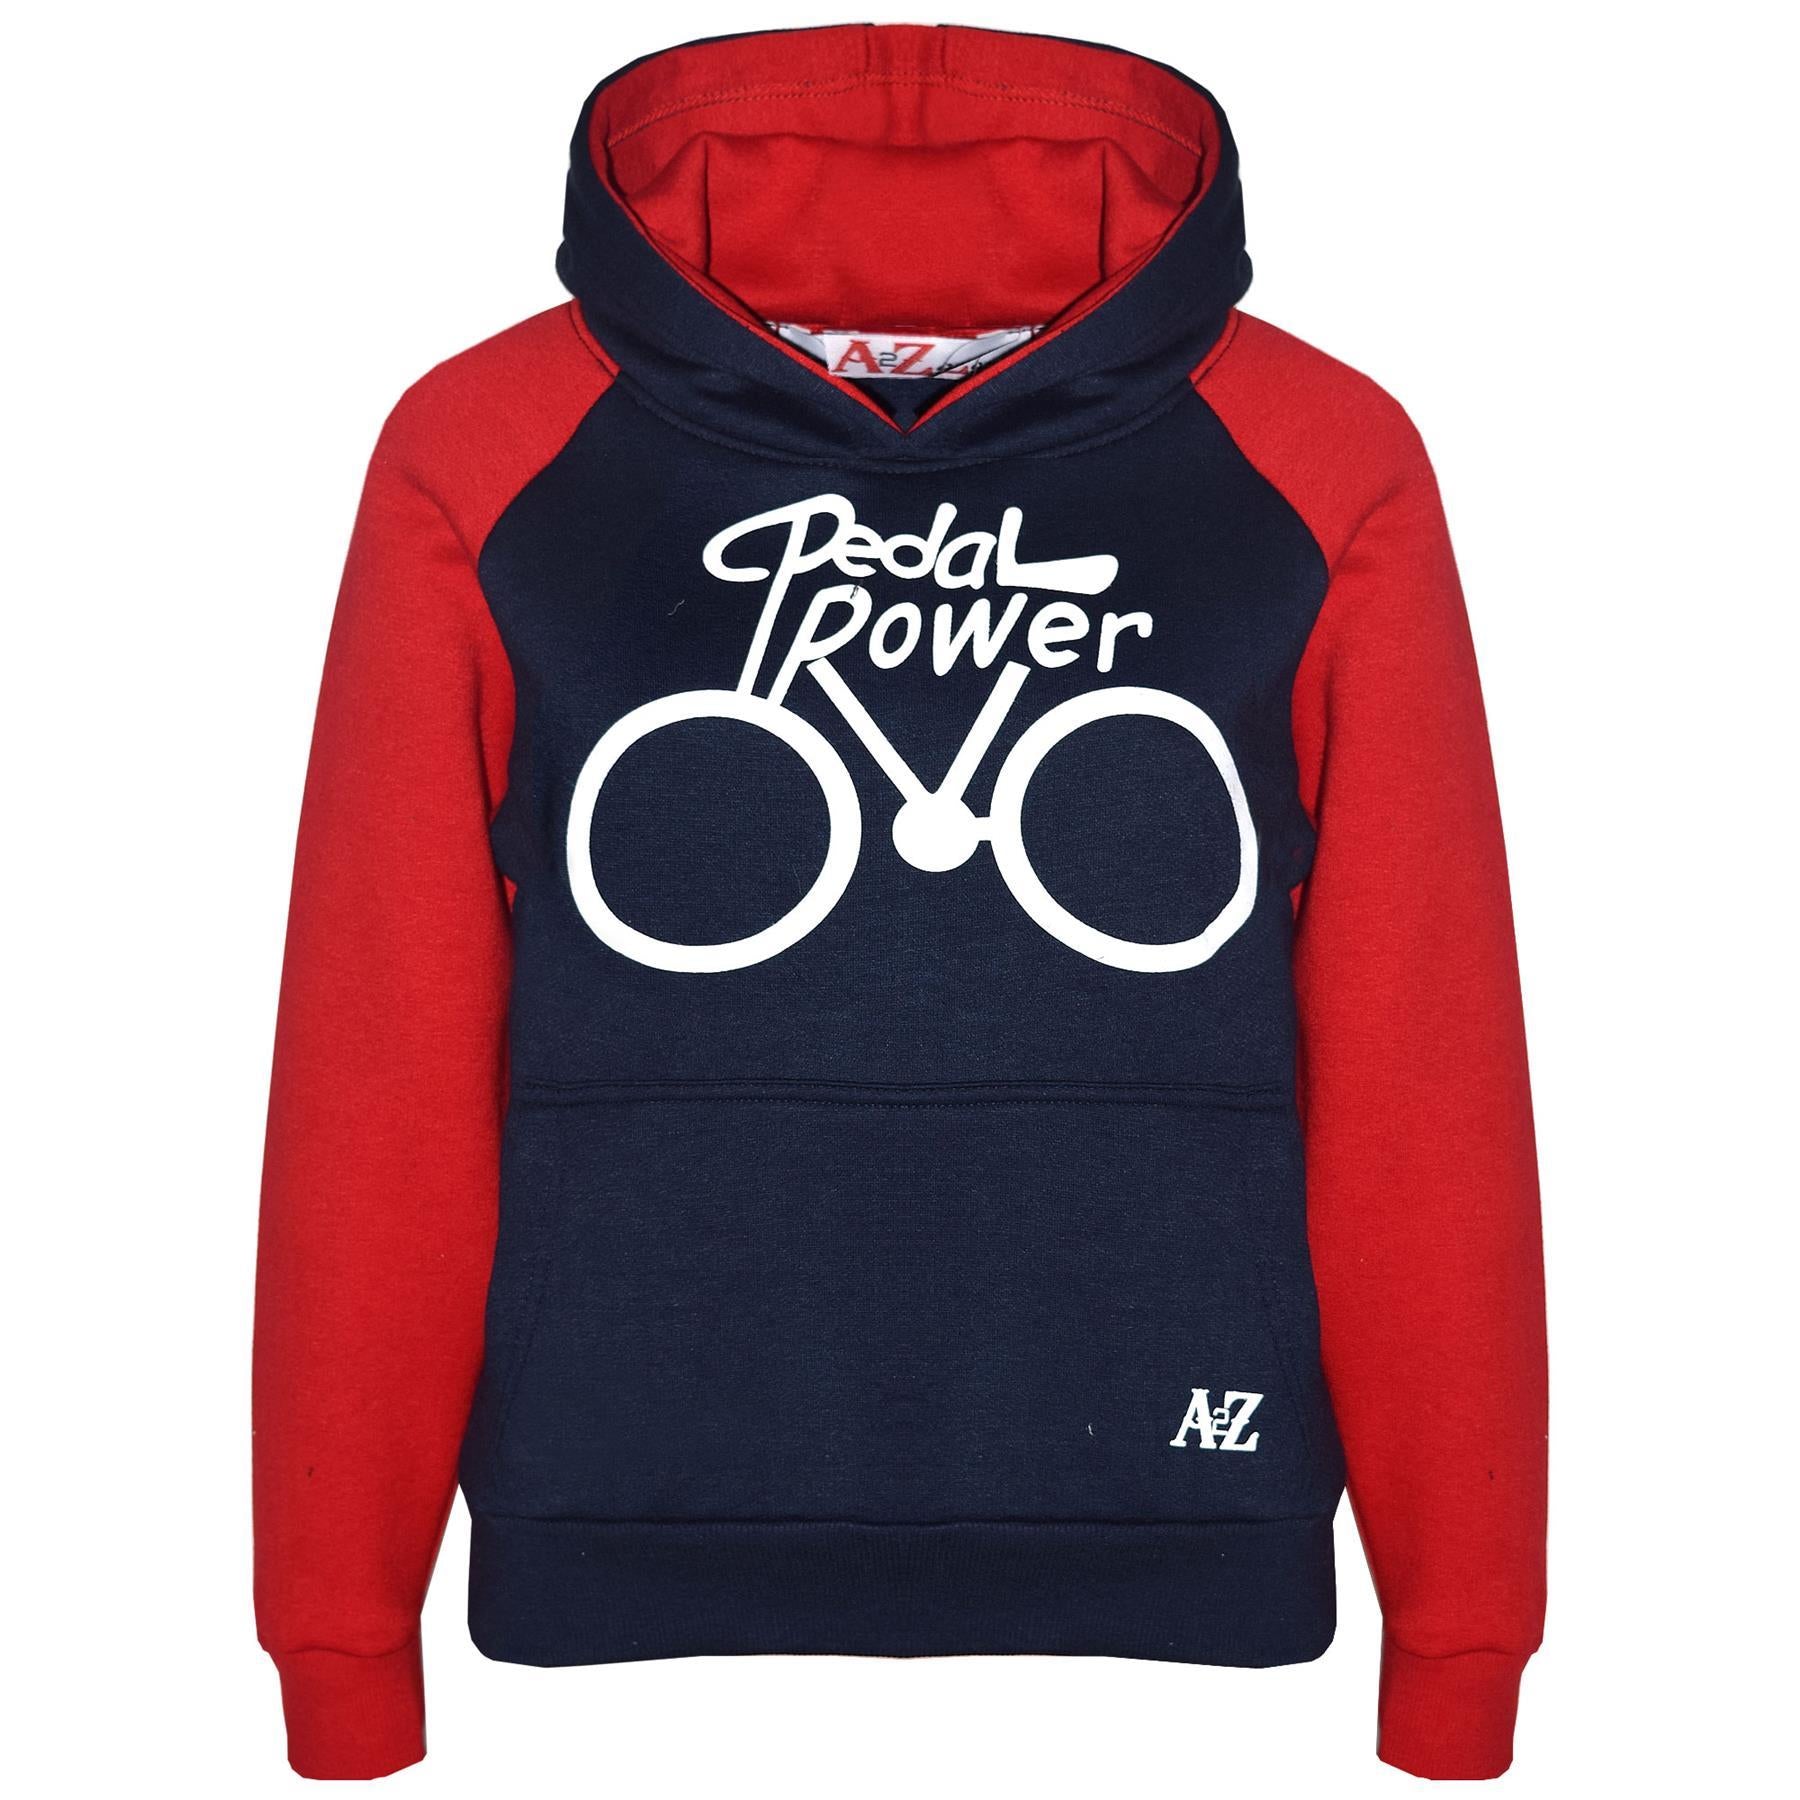 Kids Unisex Pedal Power Print Hooded Navy & Red Tracksuit